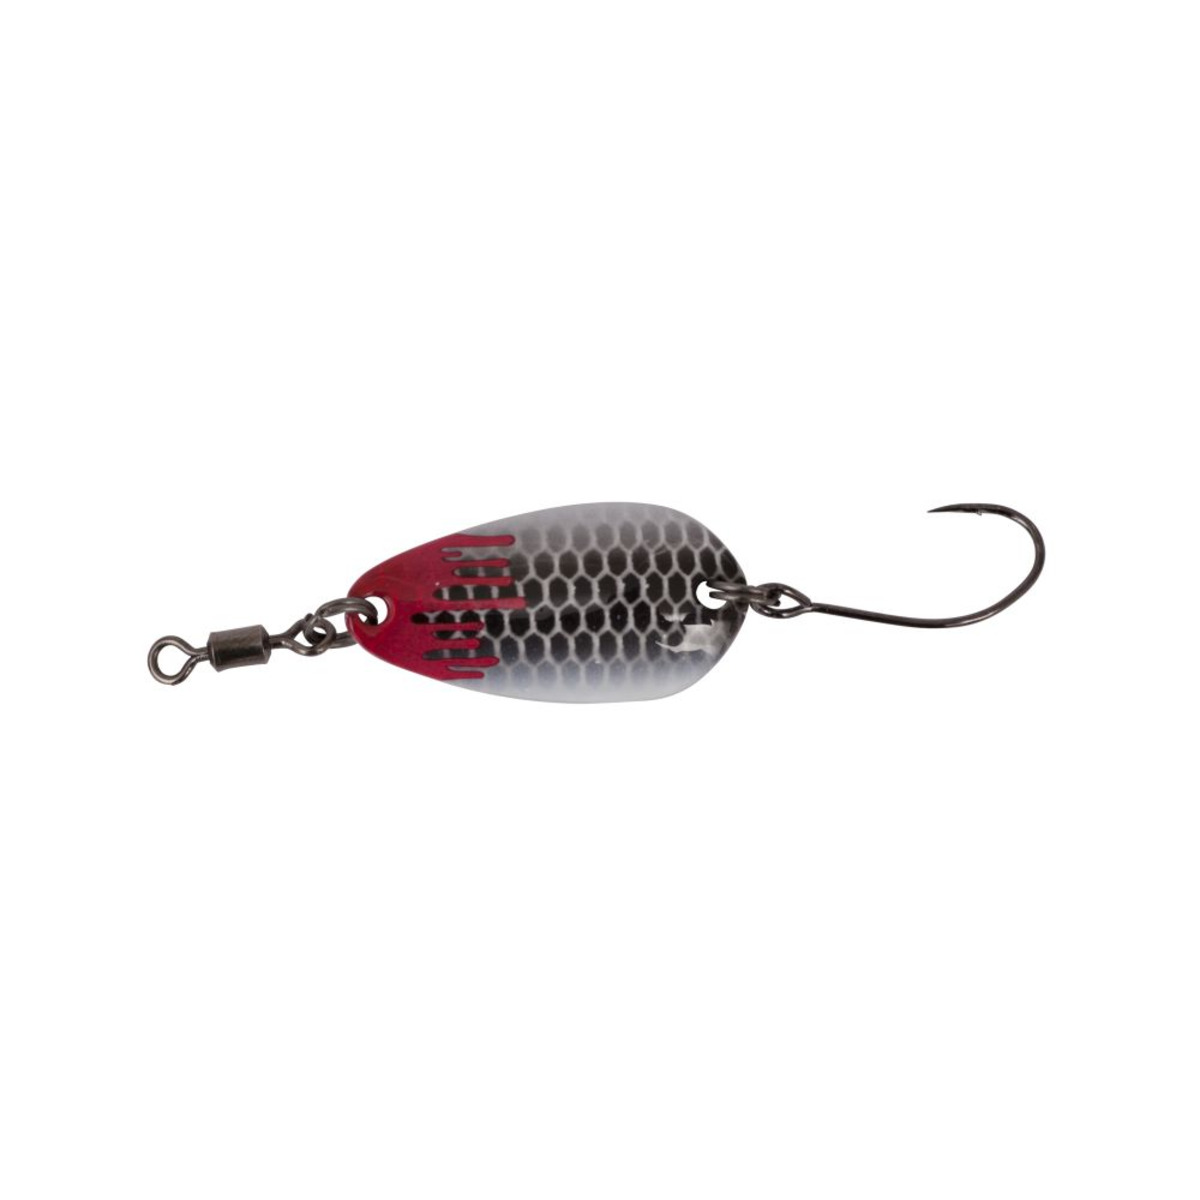 Magic Trout Bloody Loony Spoon - 2 g black/white